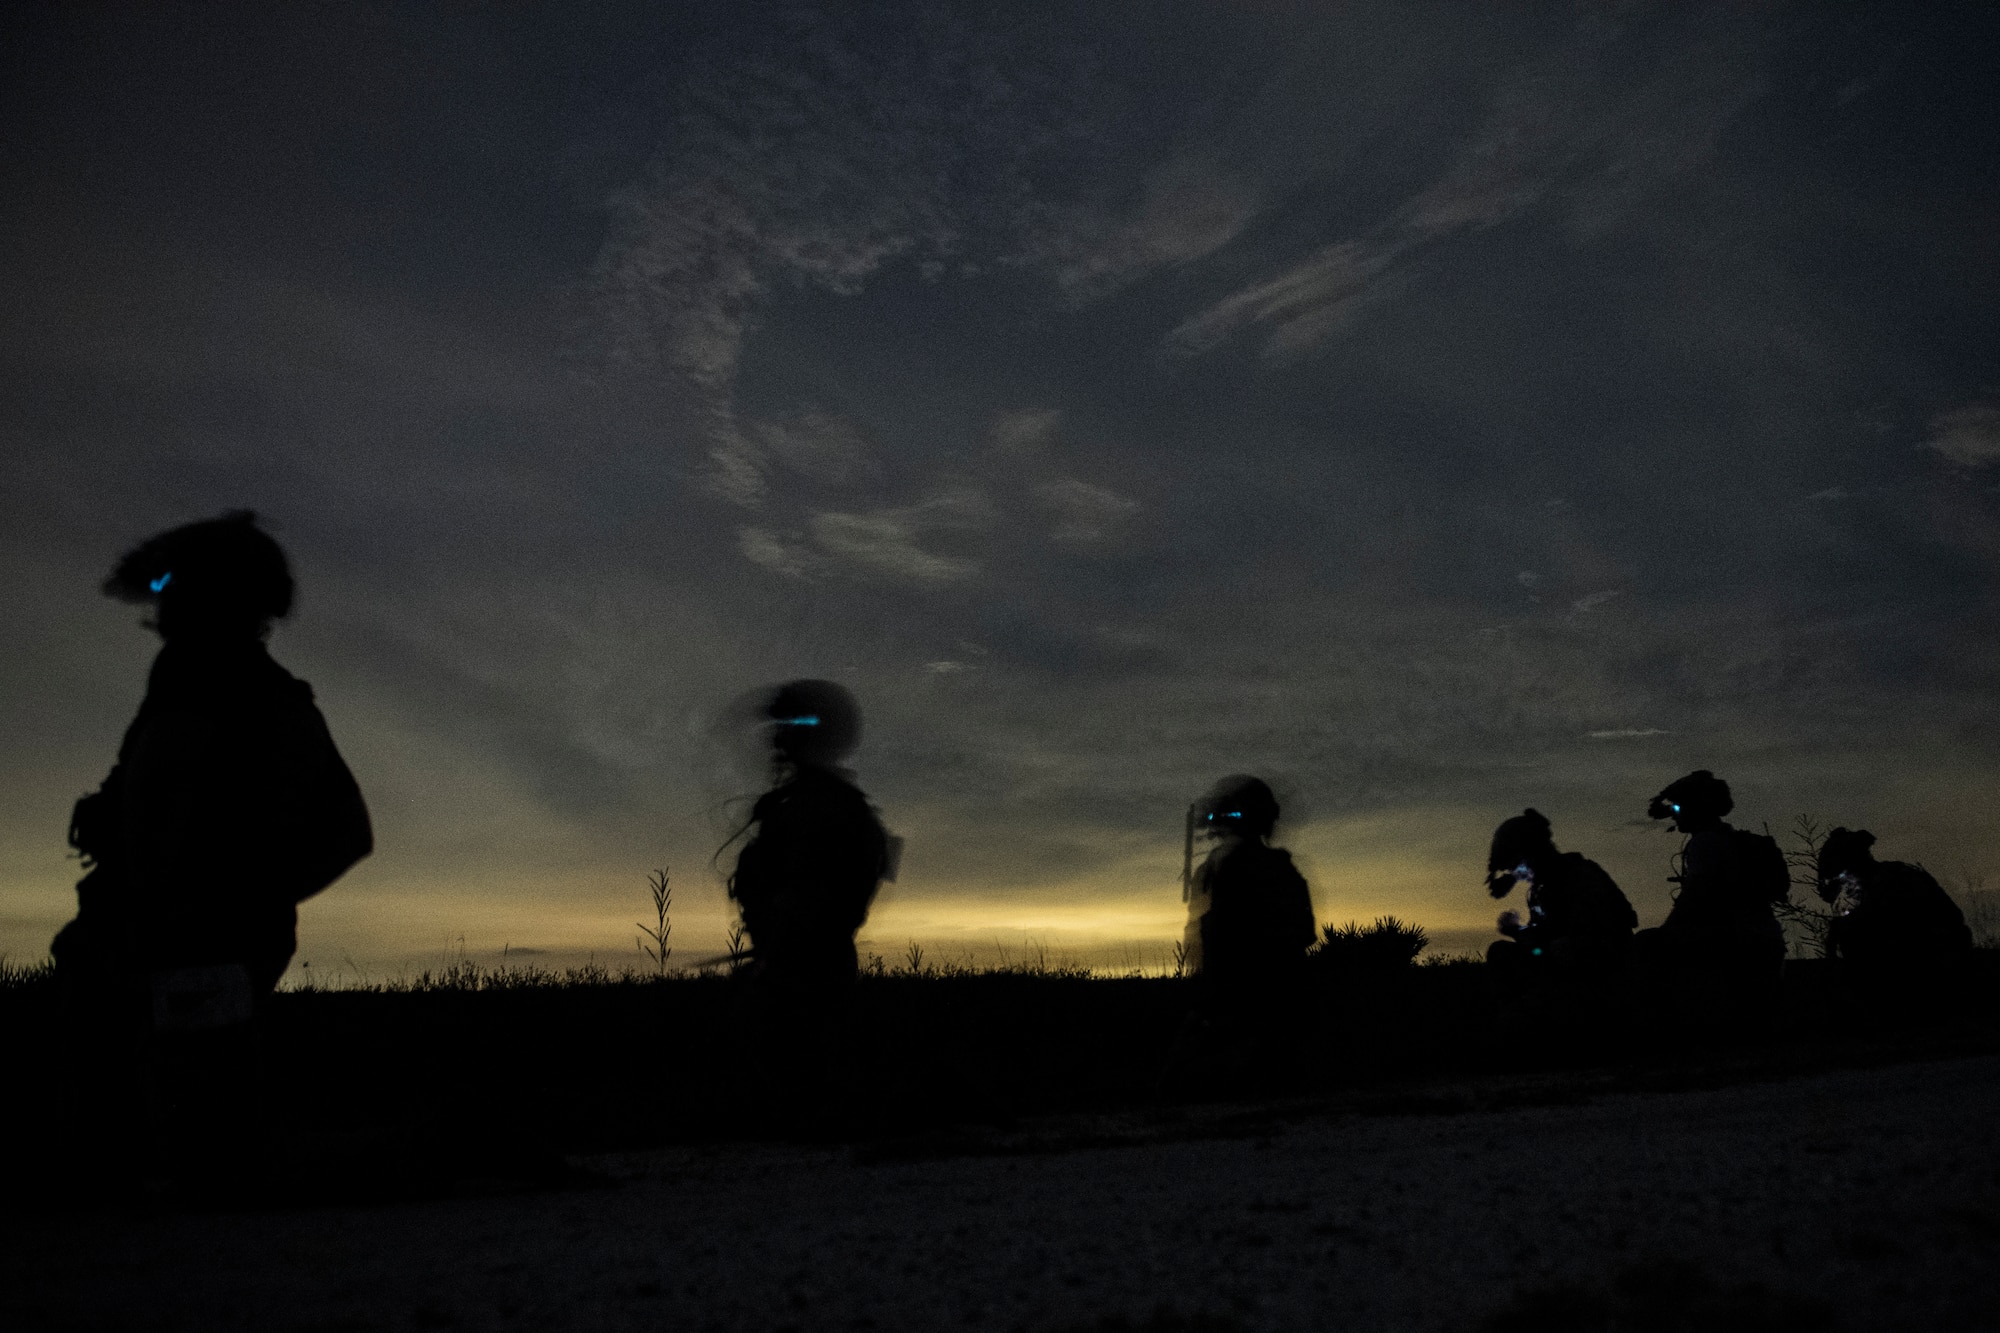 A half dozen special operations troops stand spaced apart in a line profiled by a narrow streak of sunset in the background. Special operations troops from the Army, Air Force and Marine Corps conducted close air support during the Special Operations Terminal Attack Controller Course at Avon Park Florida, Aug. 6, 2020.